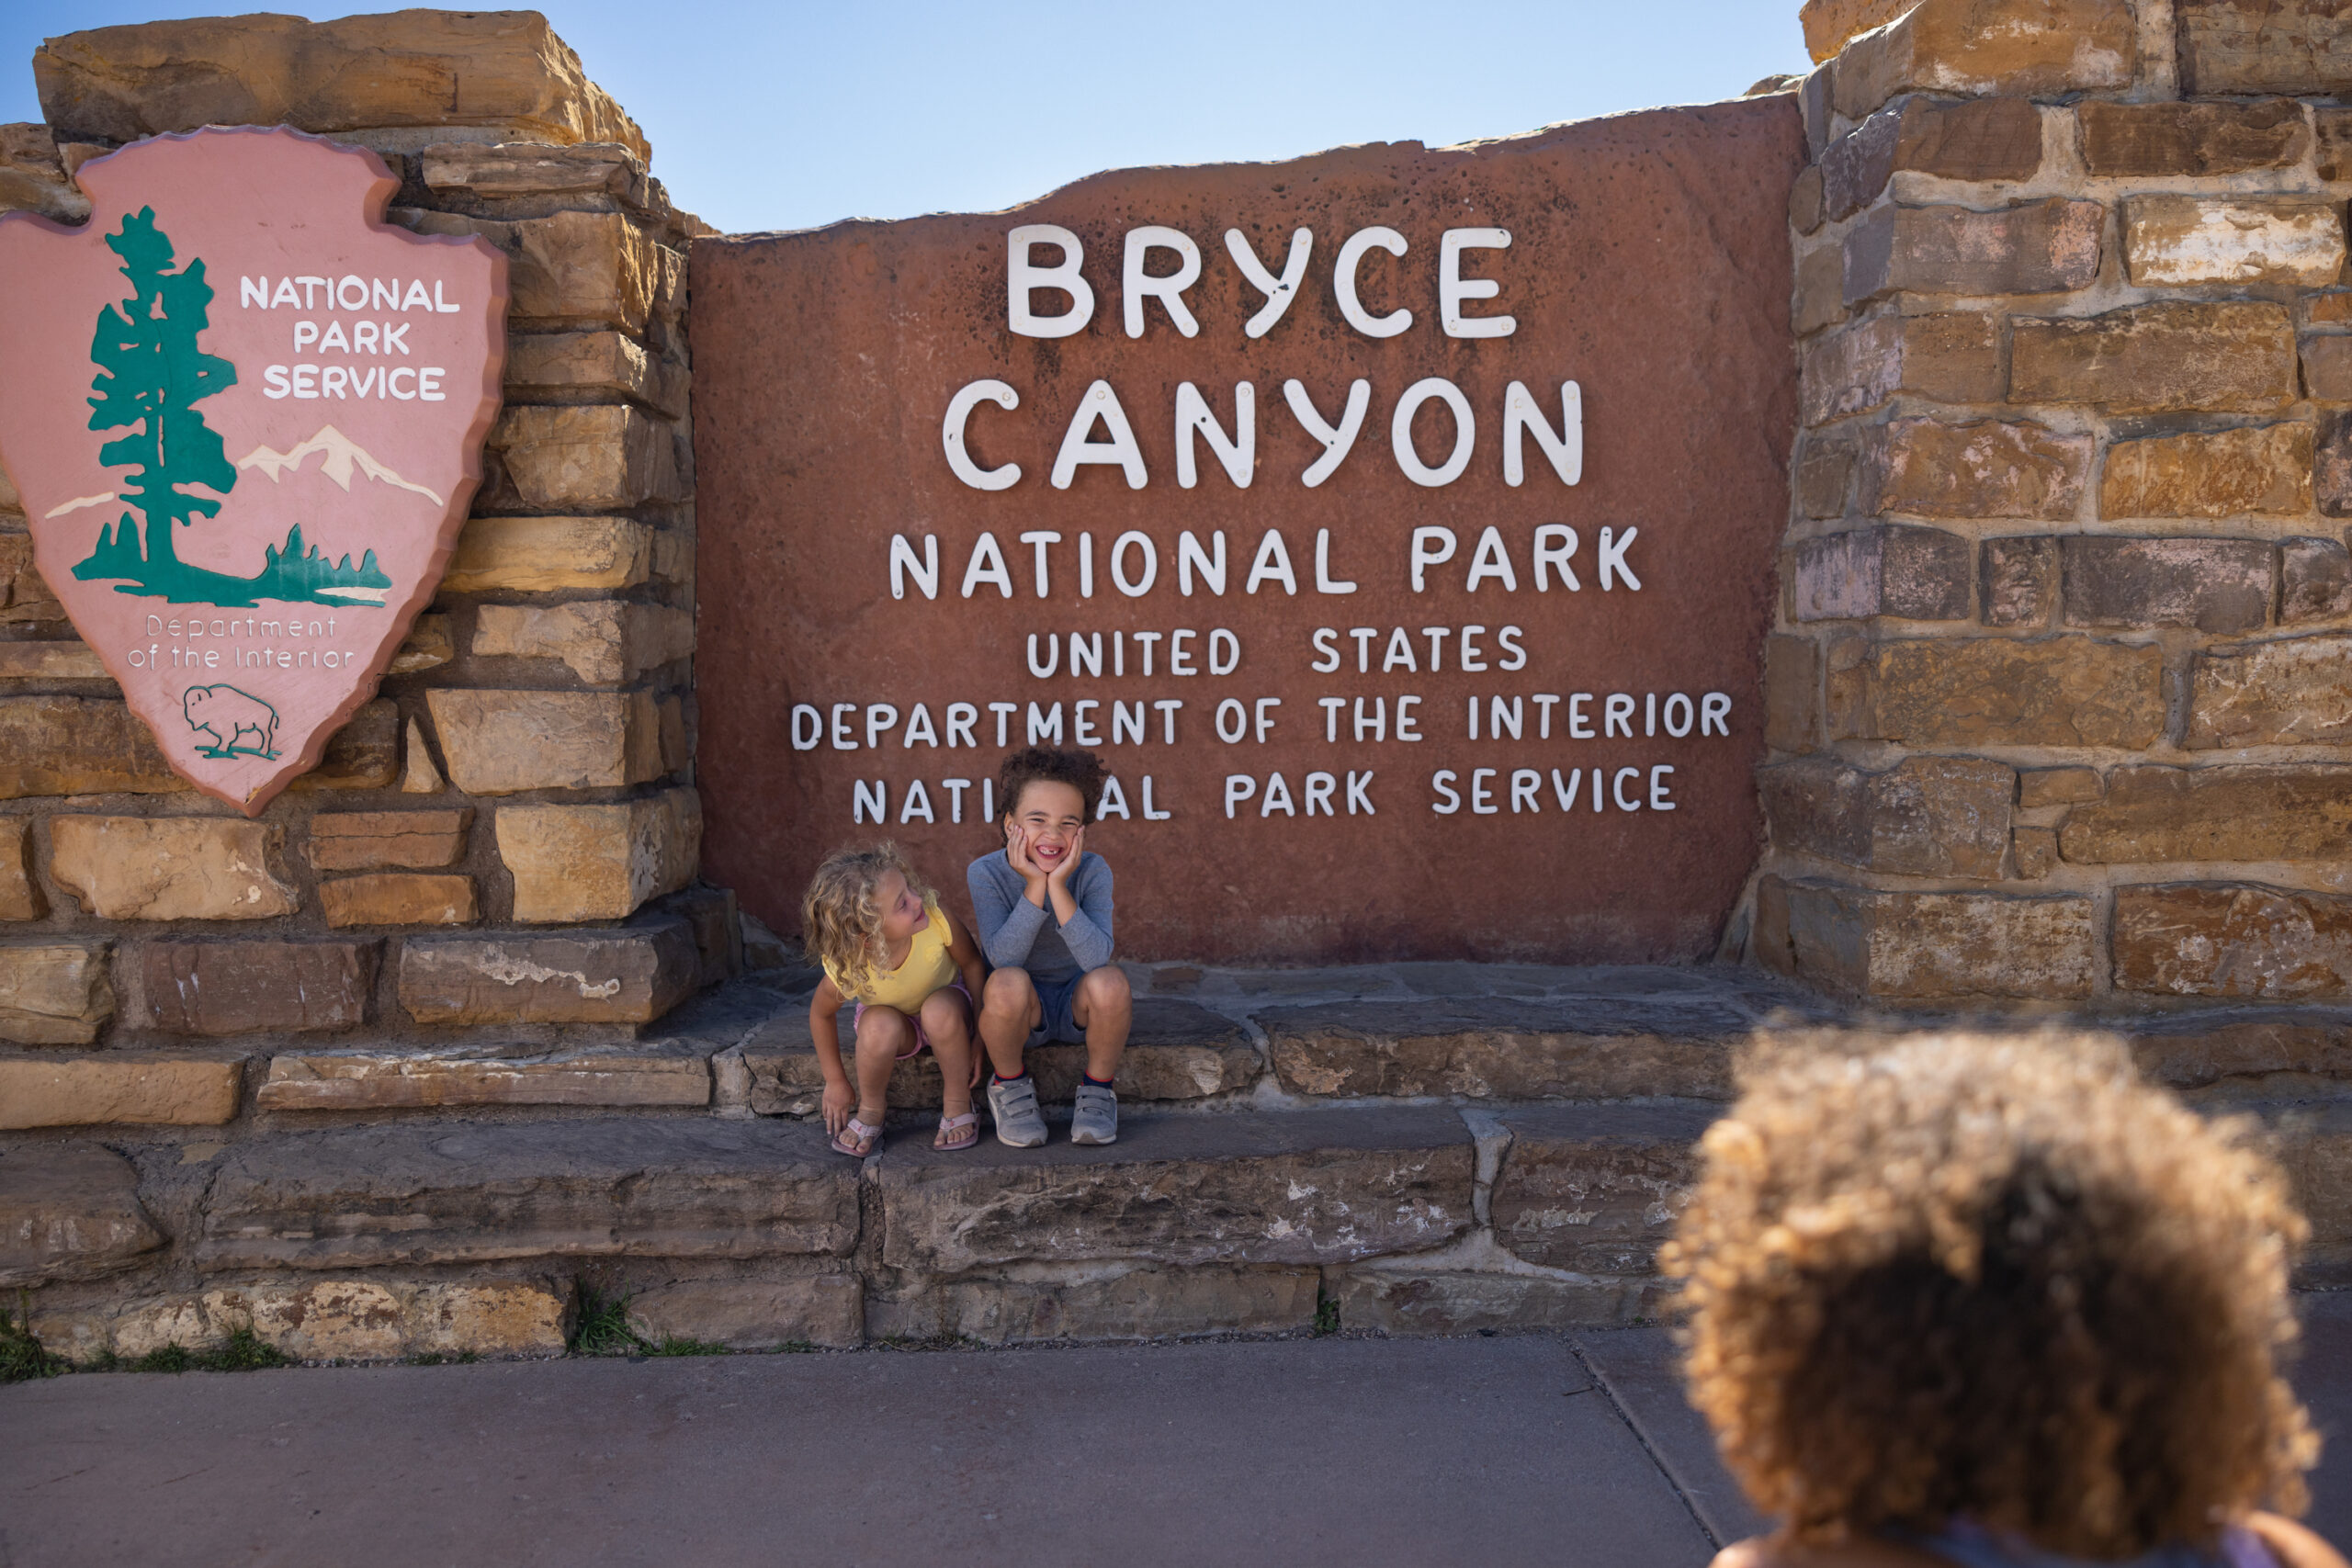 Utah’s Bryce Canyon to celebrate special centennial ceremony in June